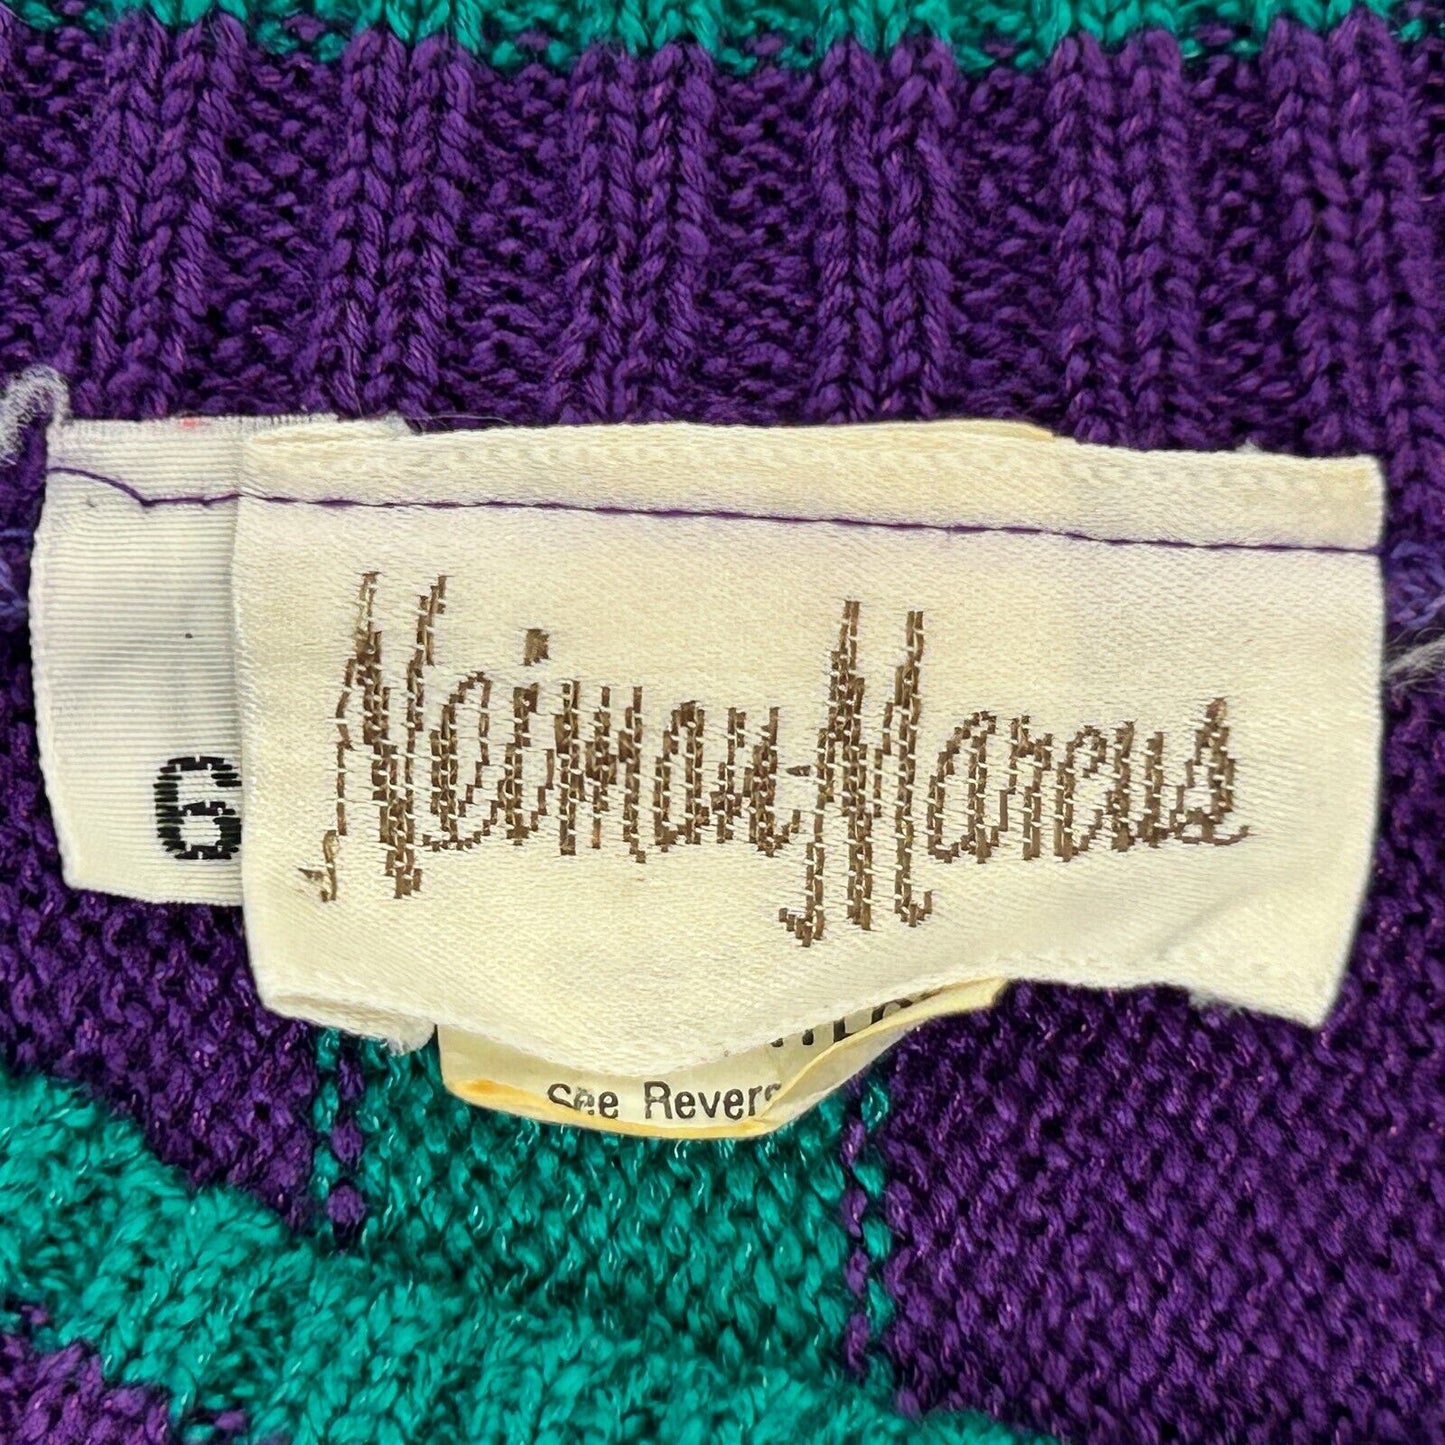 Neiman Marcus Womens Sweater Vintage 80s Purple Green Striped Made In USA Size 6